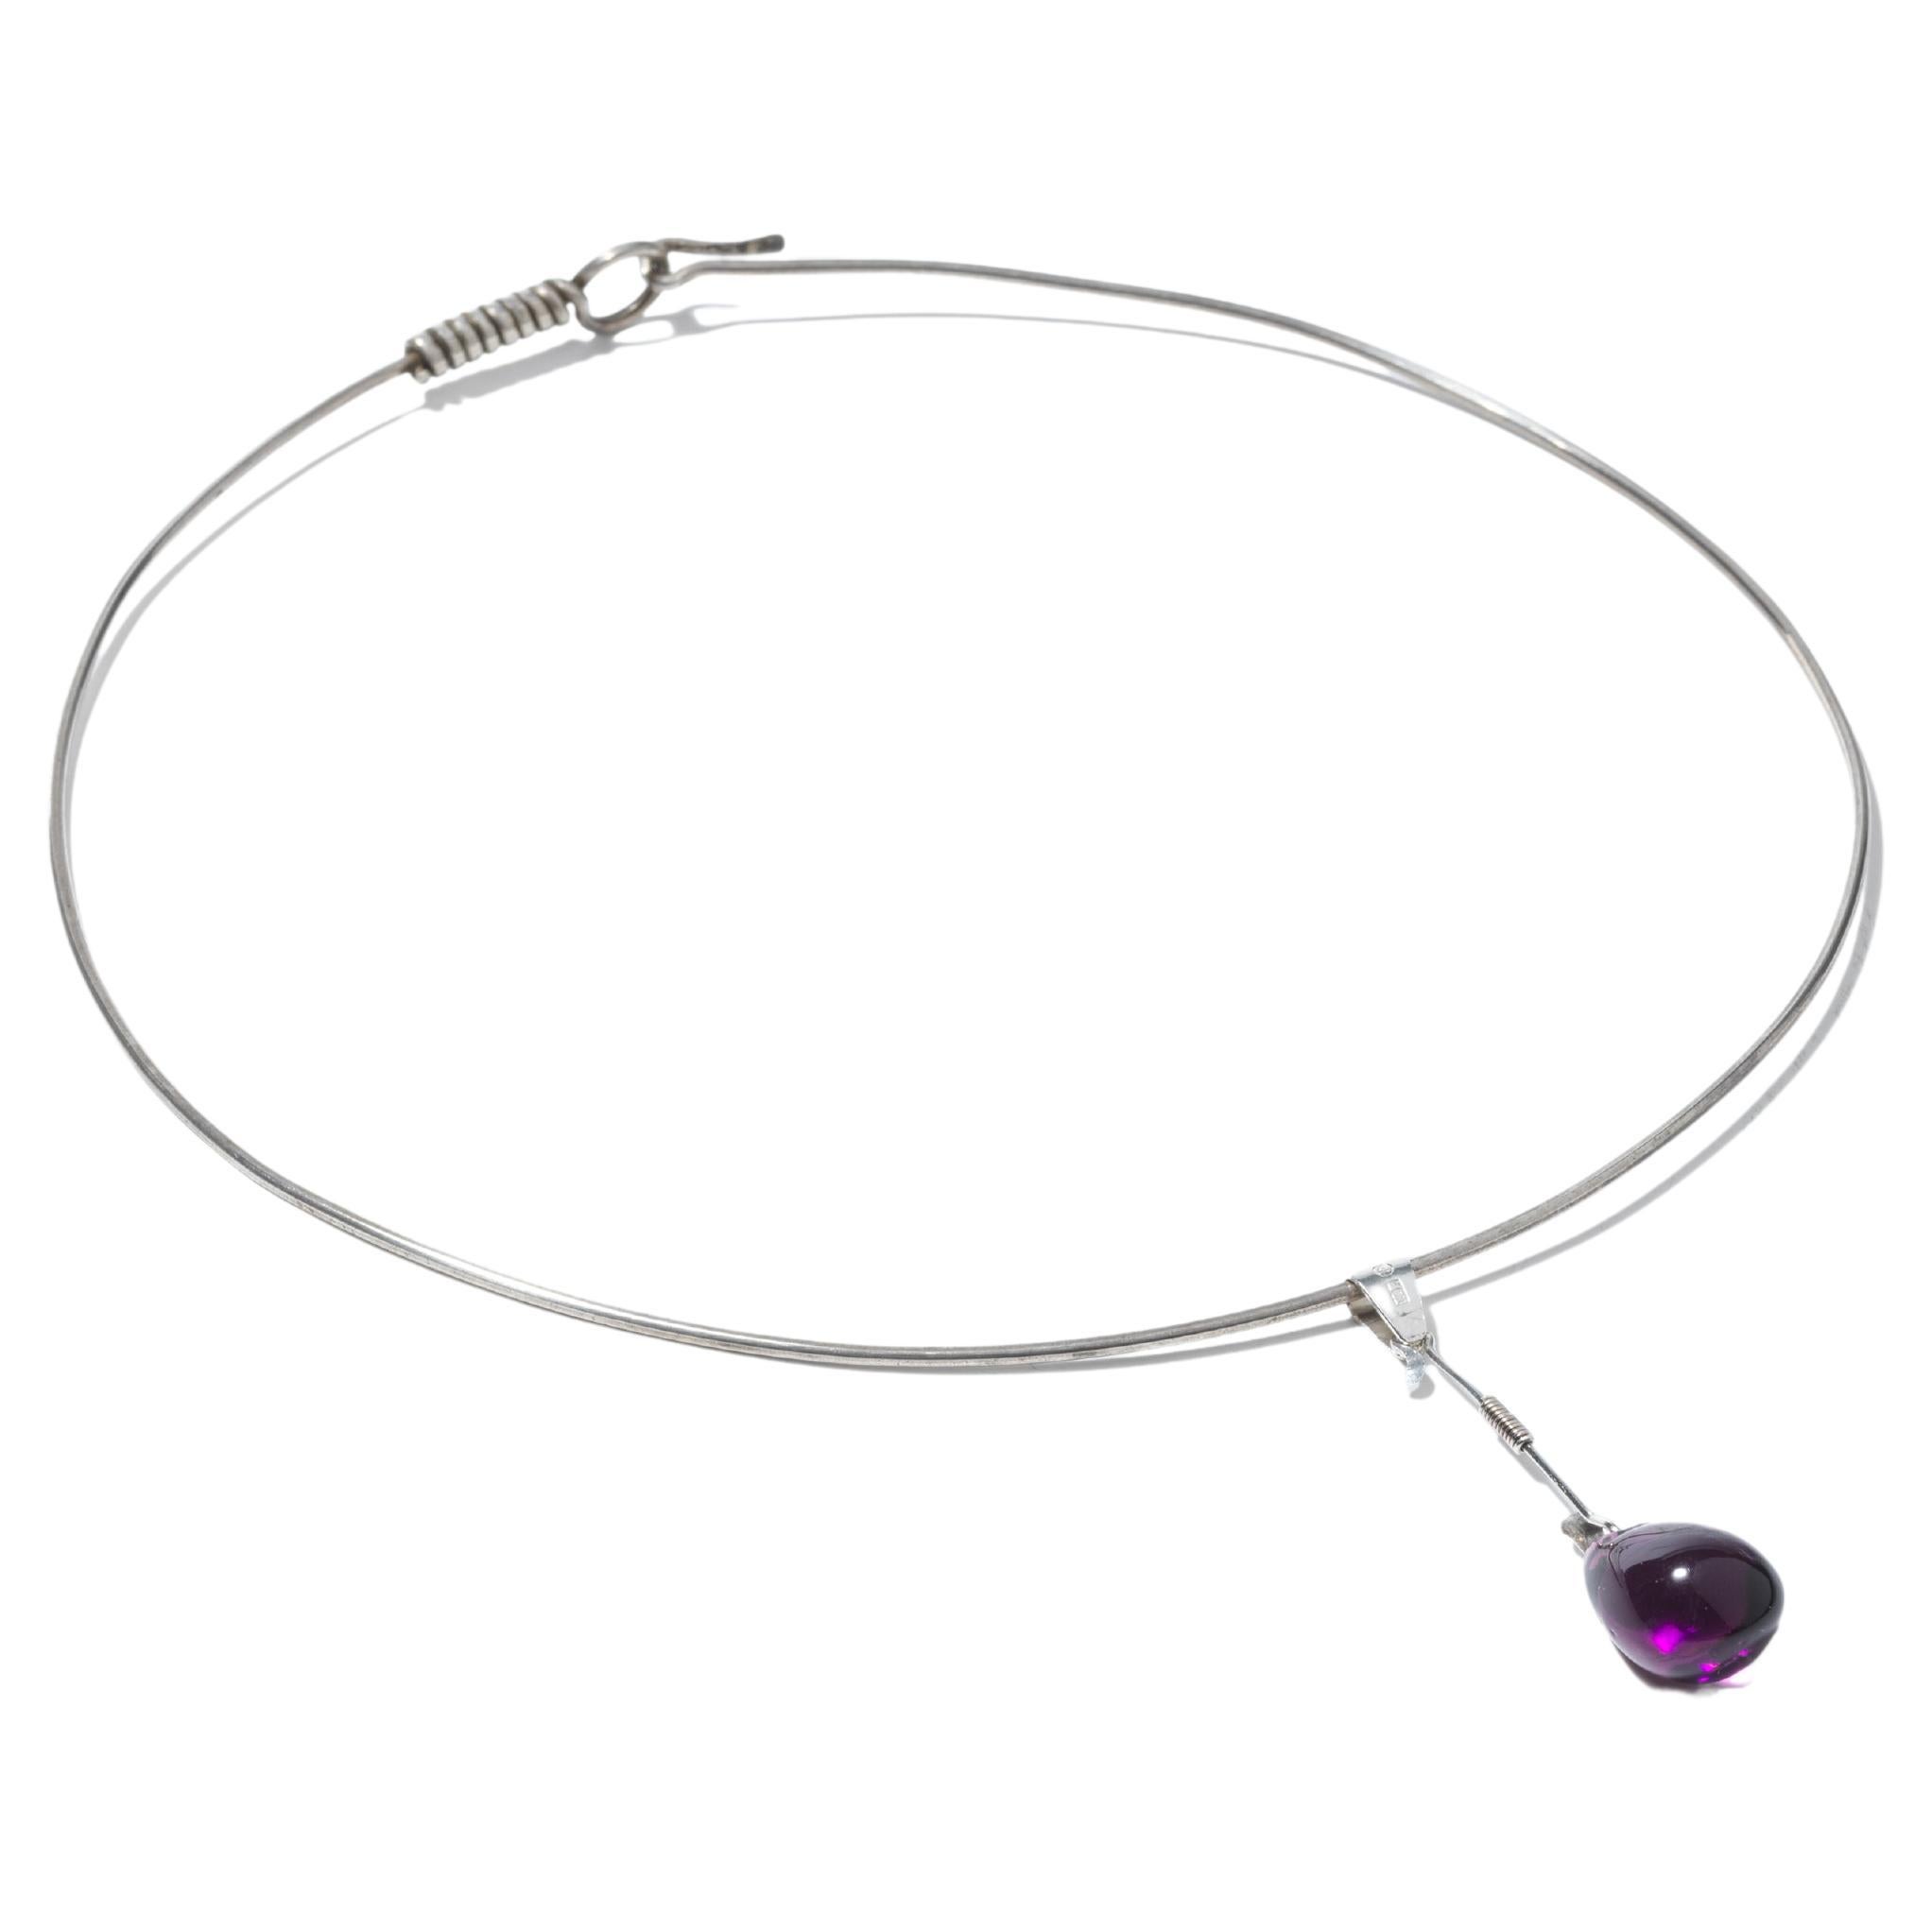 Vintage Silver and Amethyst Neck Ring / Pendant For Sale